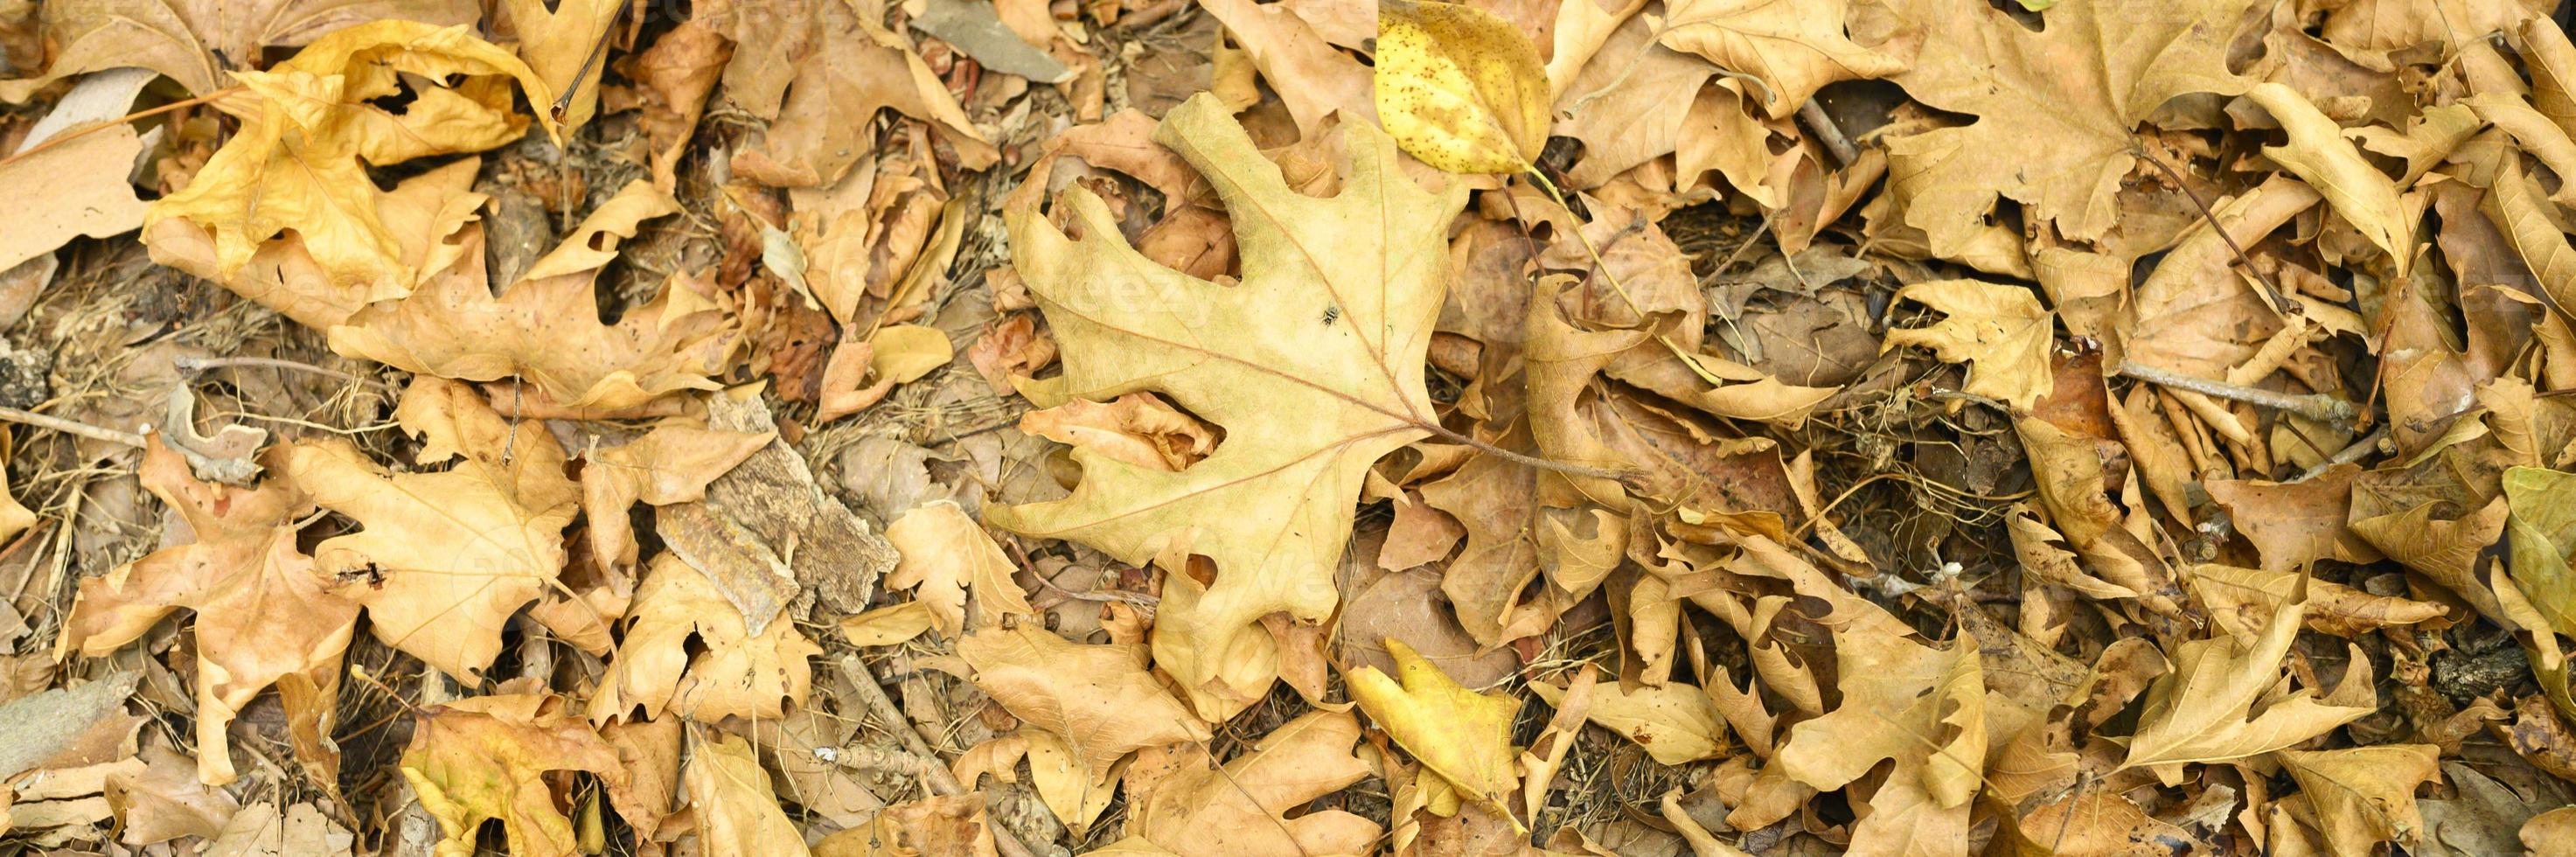 textured background of dry withered fallen autumn leaves of maple trees photo